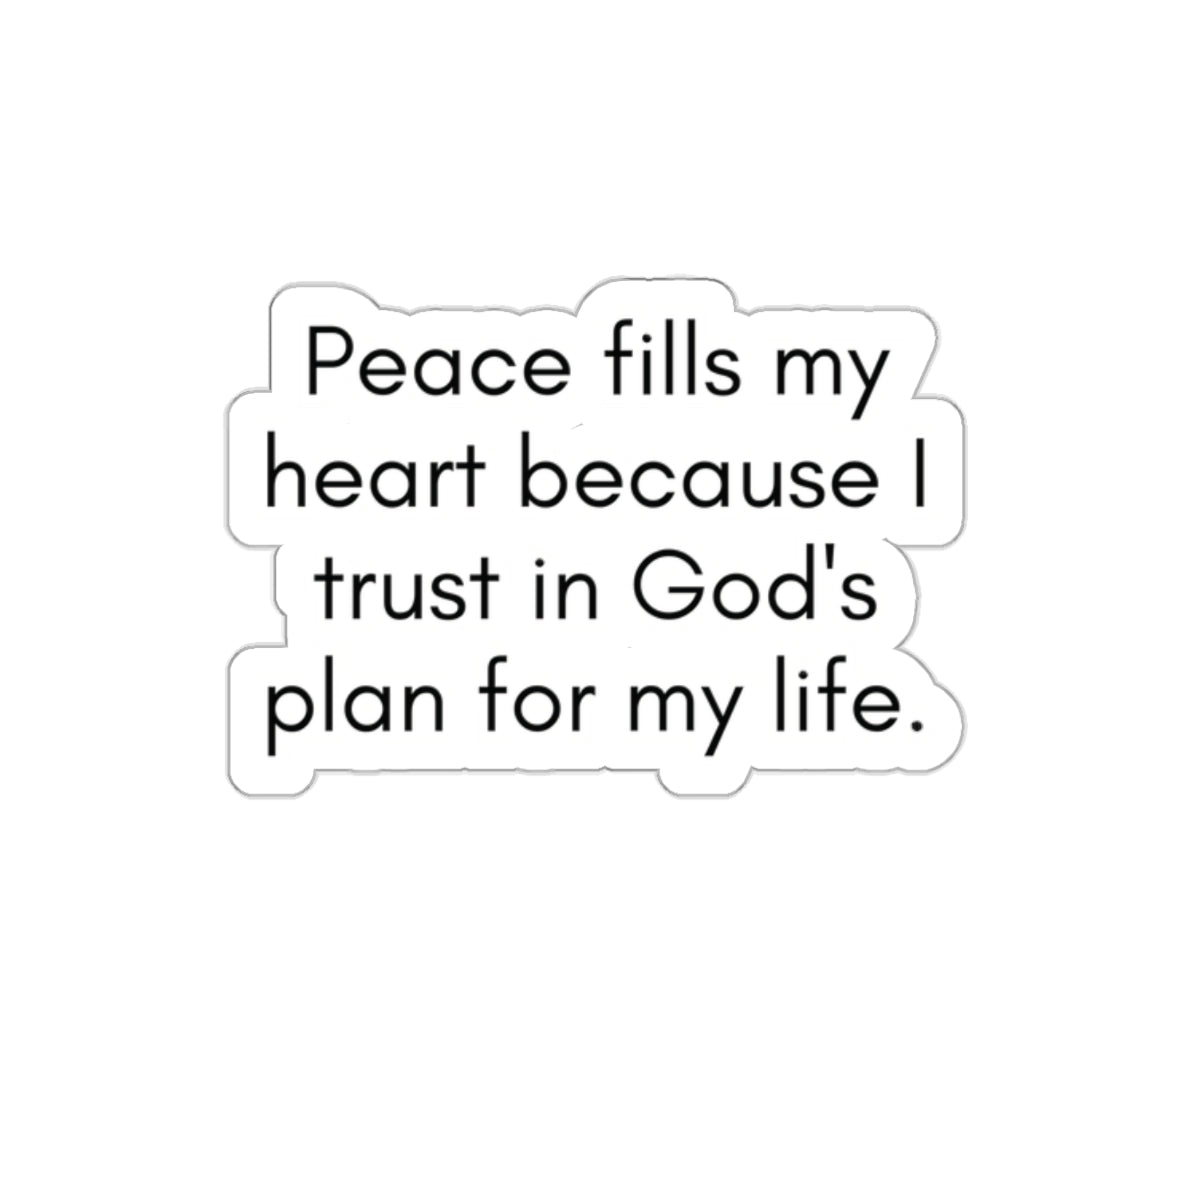 Trust In God's Plan For My Life Inspirational Quote Kiss-Cut Stickers-KISS CUT stickers-2" × 2"-White-mysticalcherry